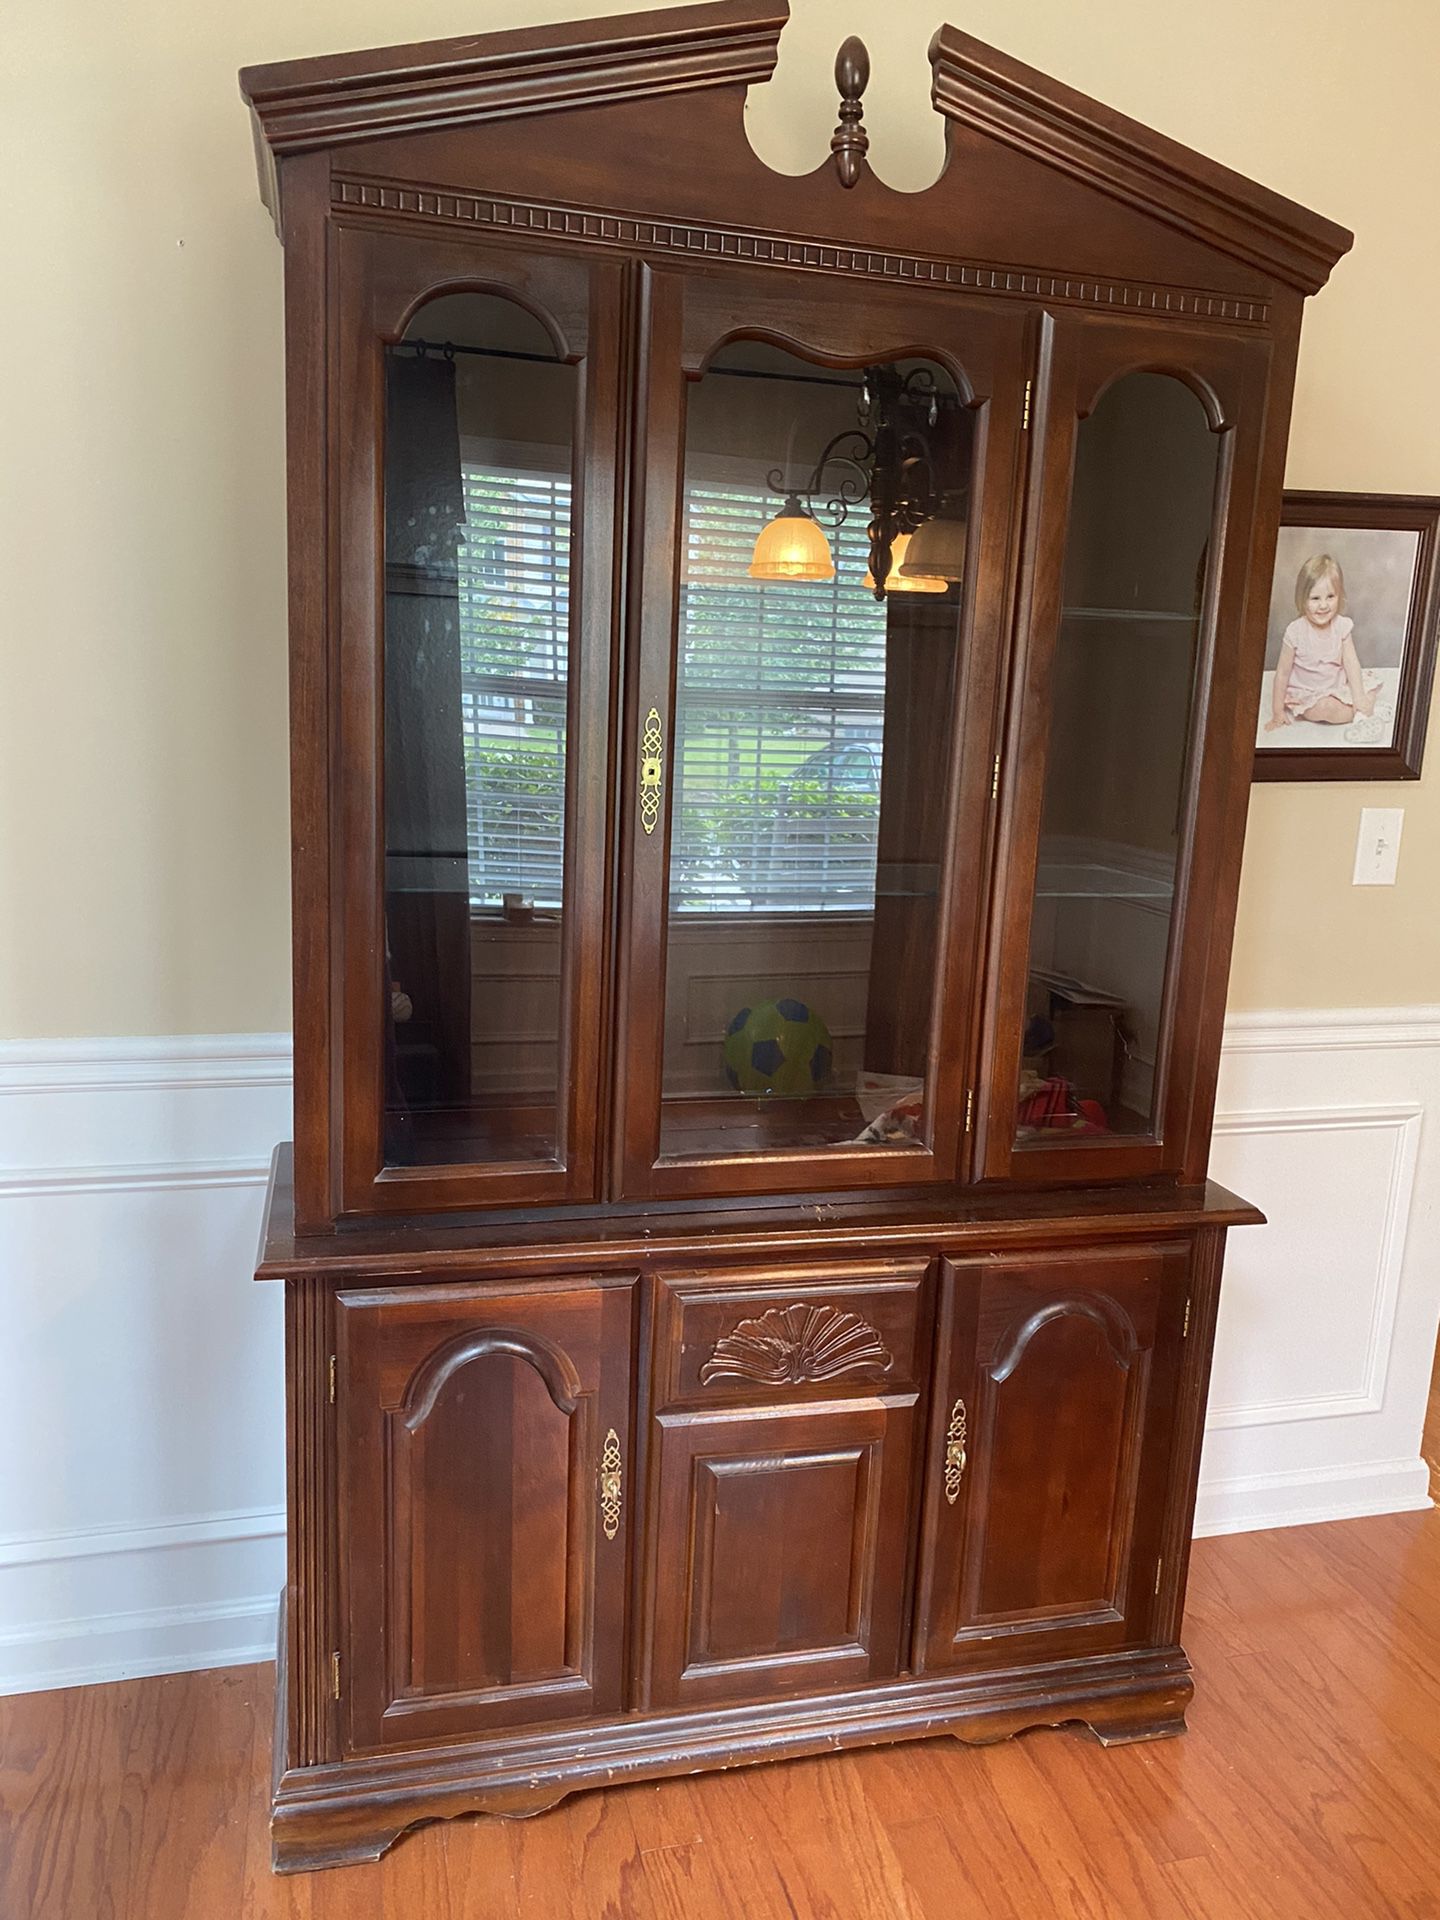 Free china cabinet...need gone ASAP, new set coming in